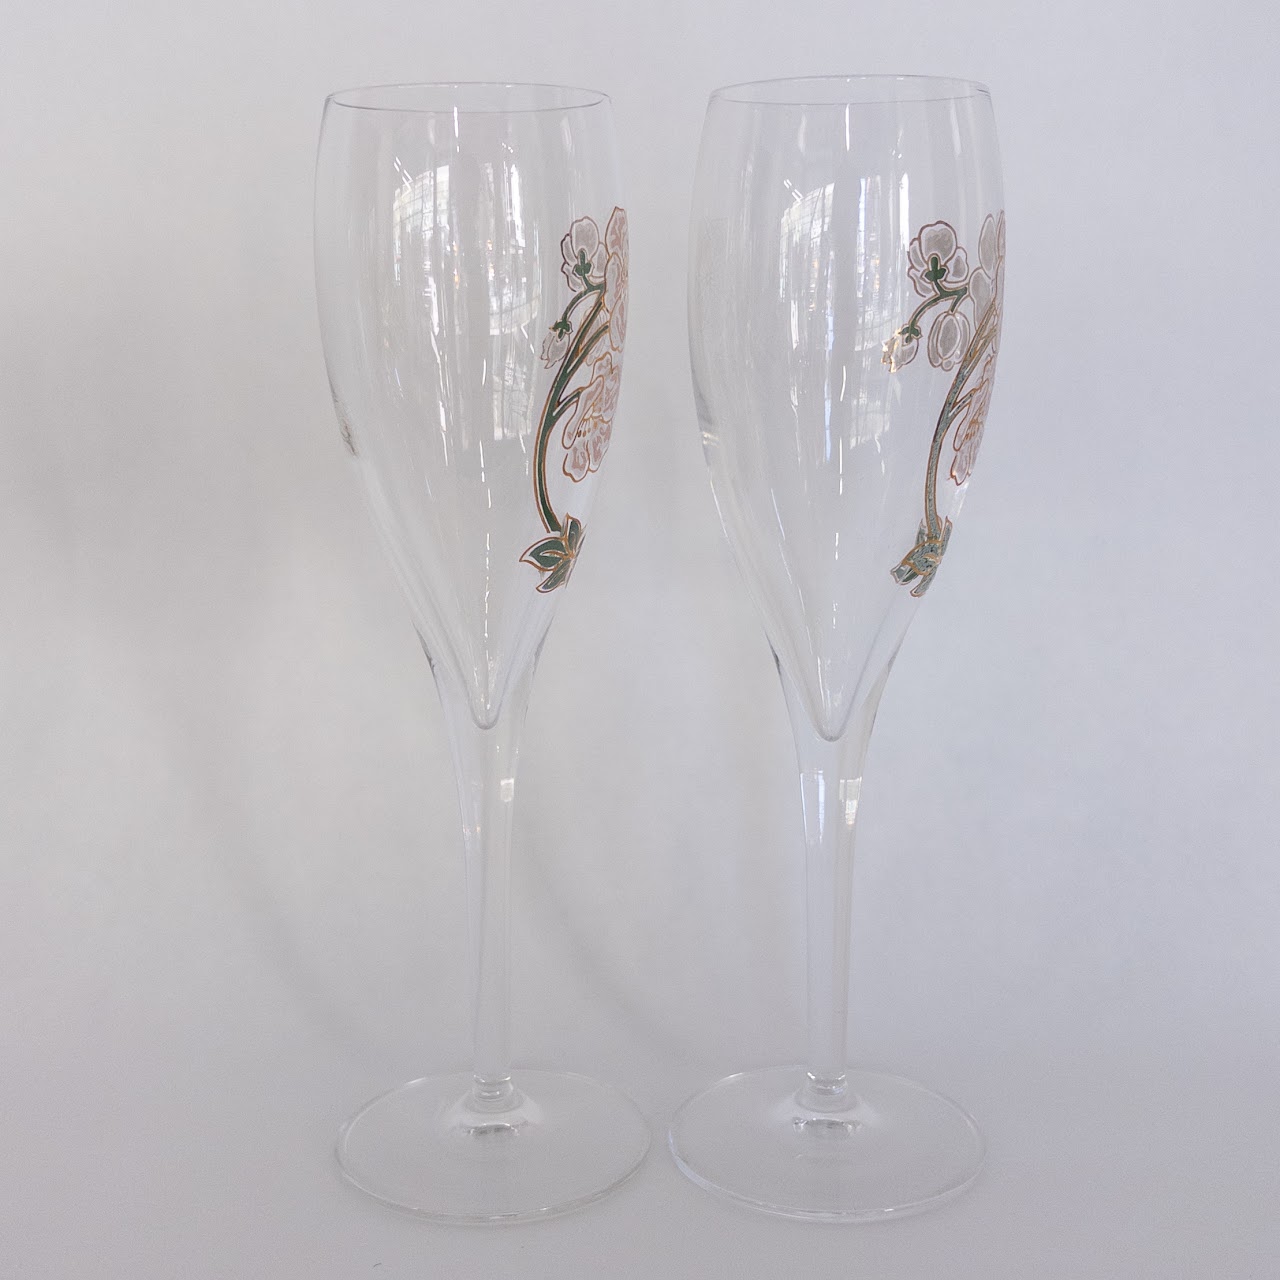 Perrier- Jouet Set of Six Decorated Champagne Flutes